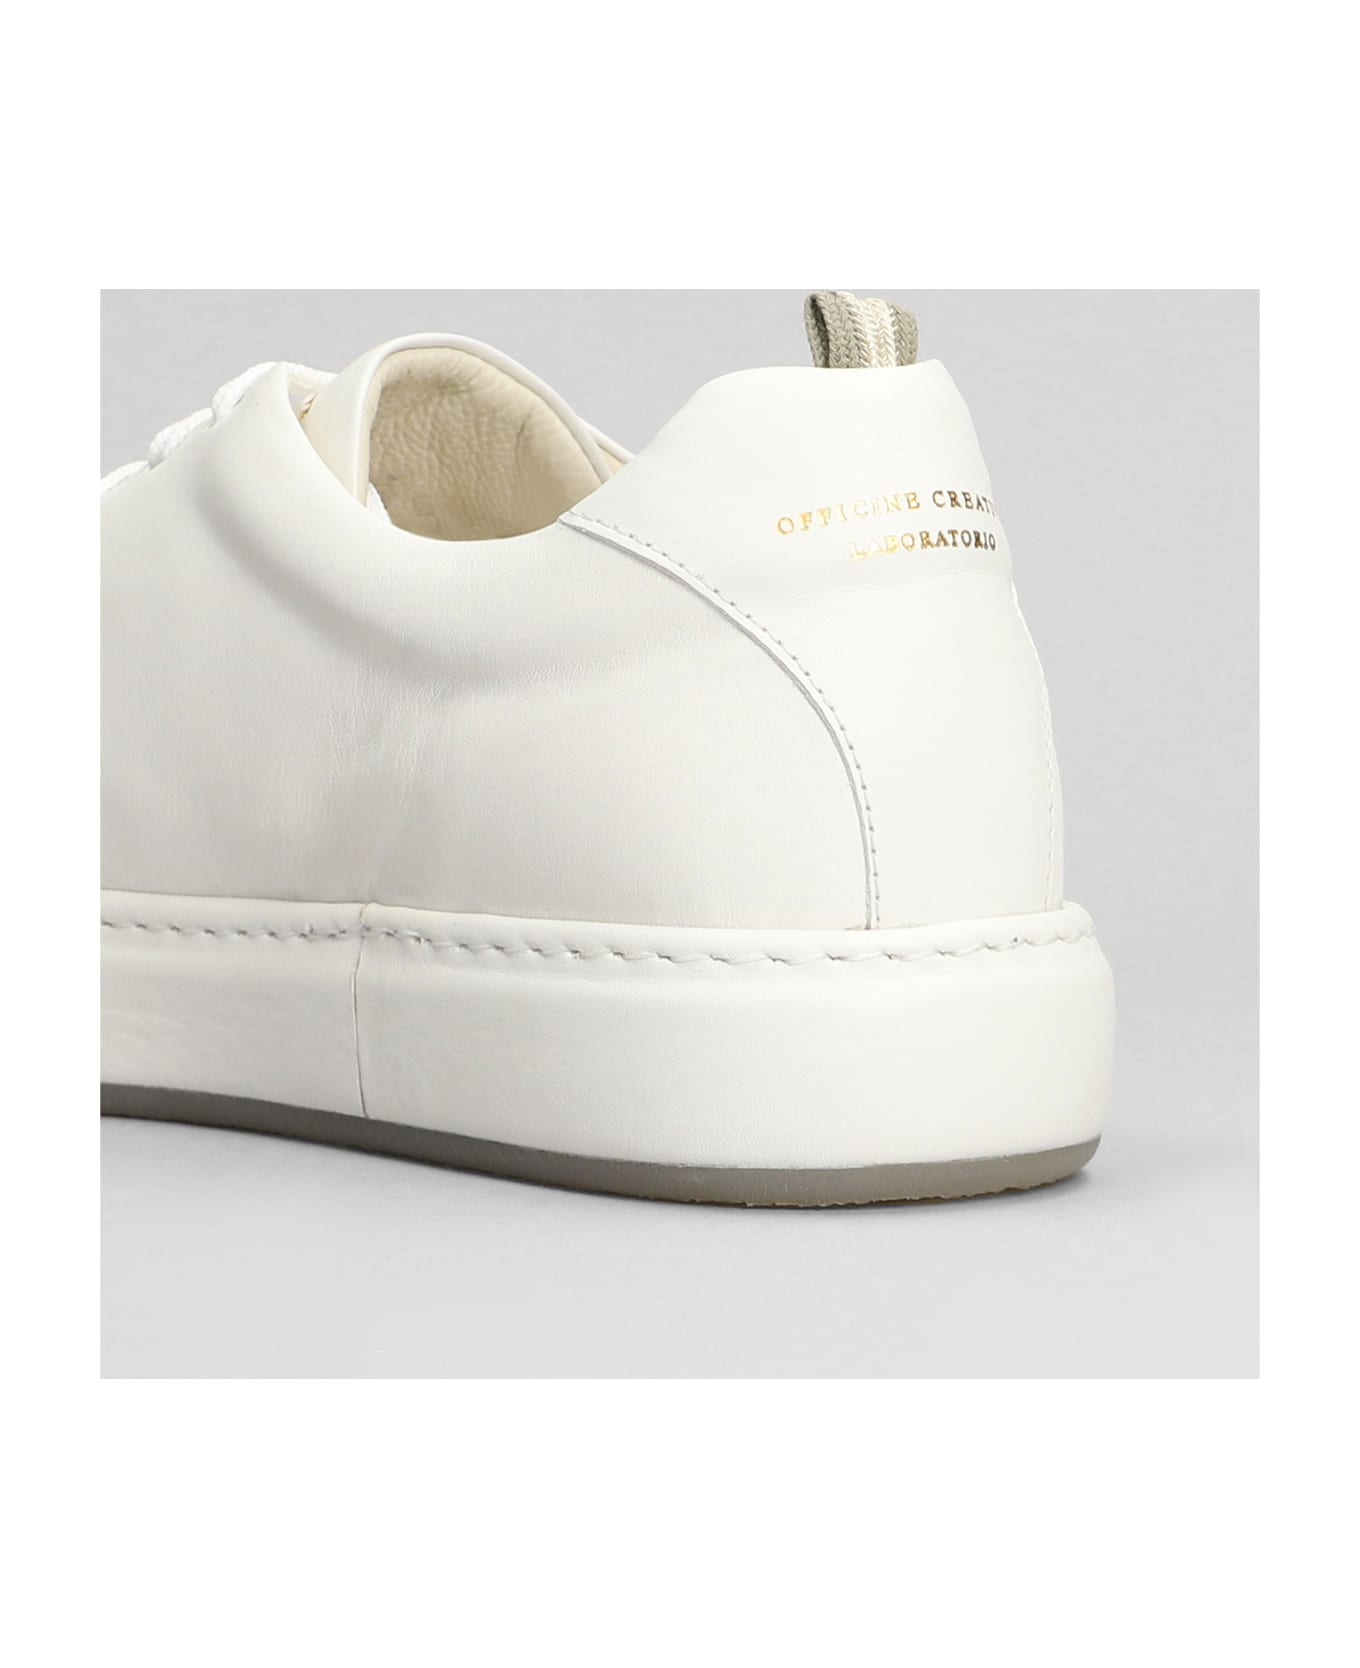 Officine Creative Covered 001 Sneakers In White Leather - white